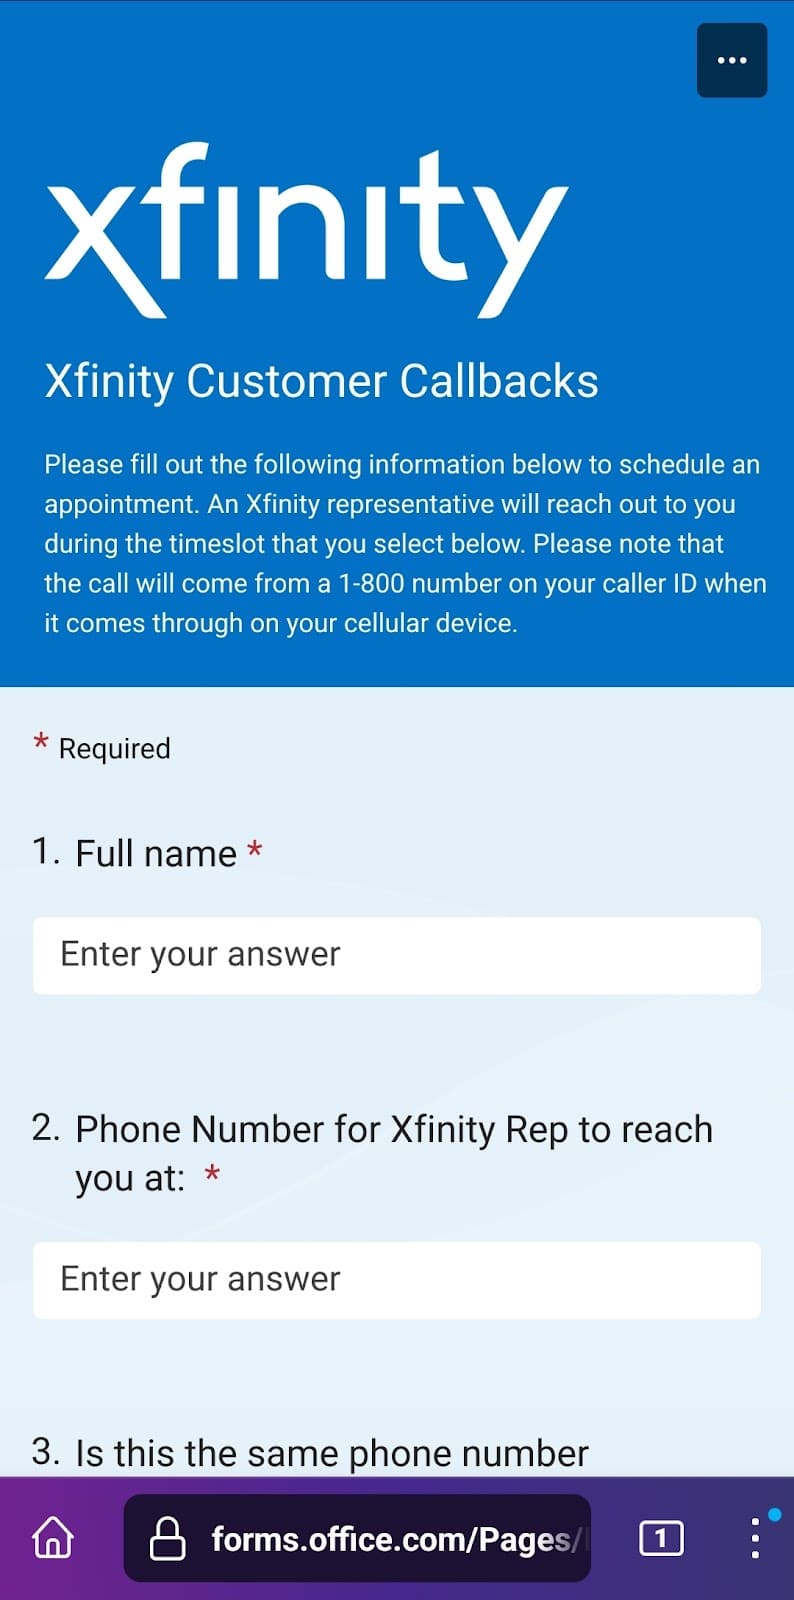 Xfinity unbranded forms page for customer callback